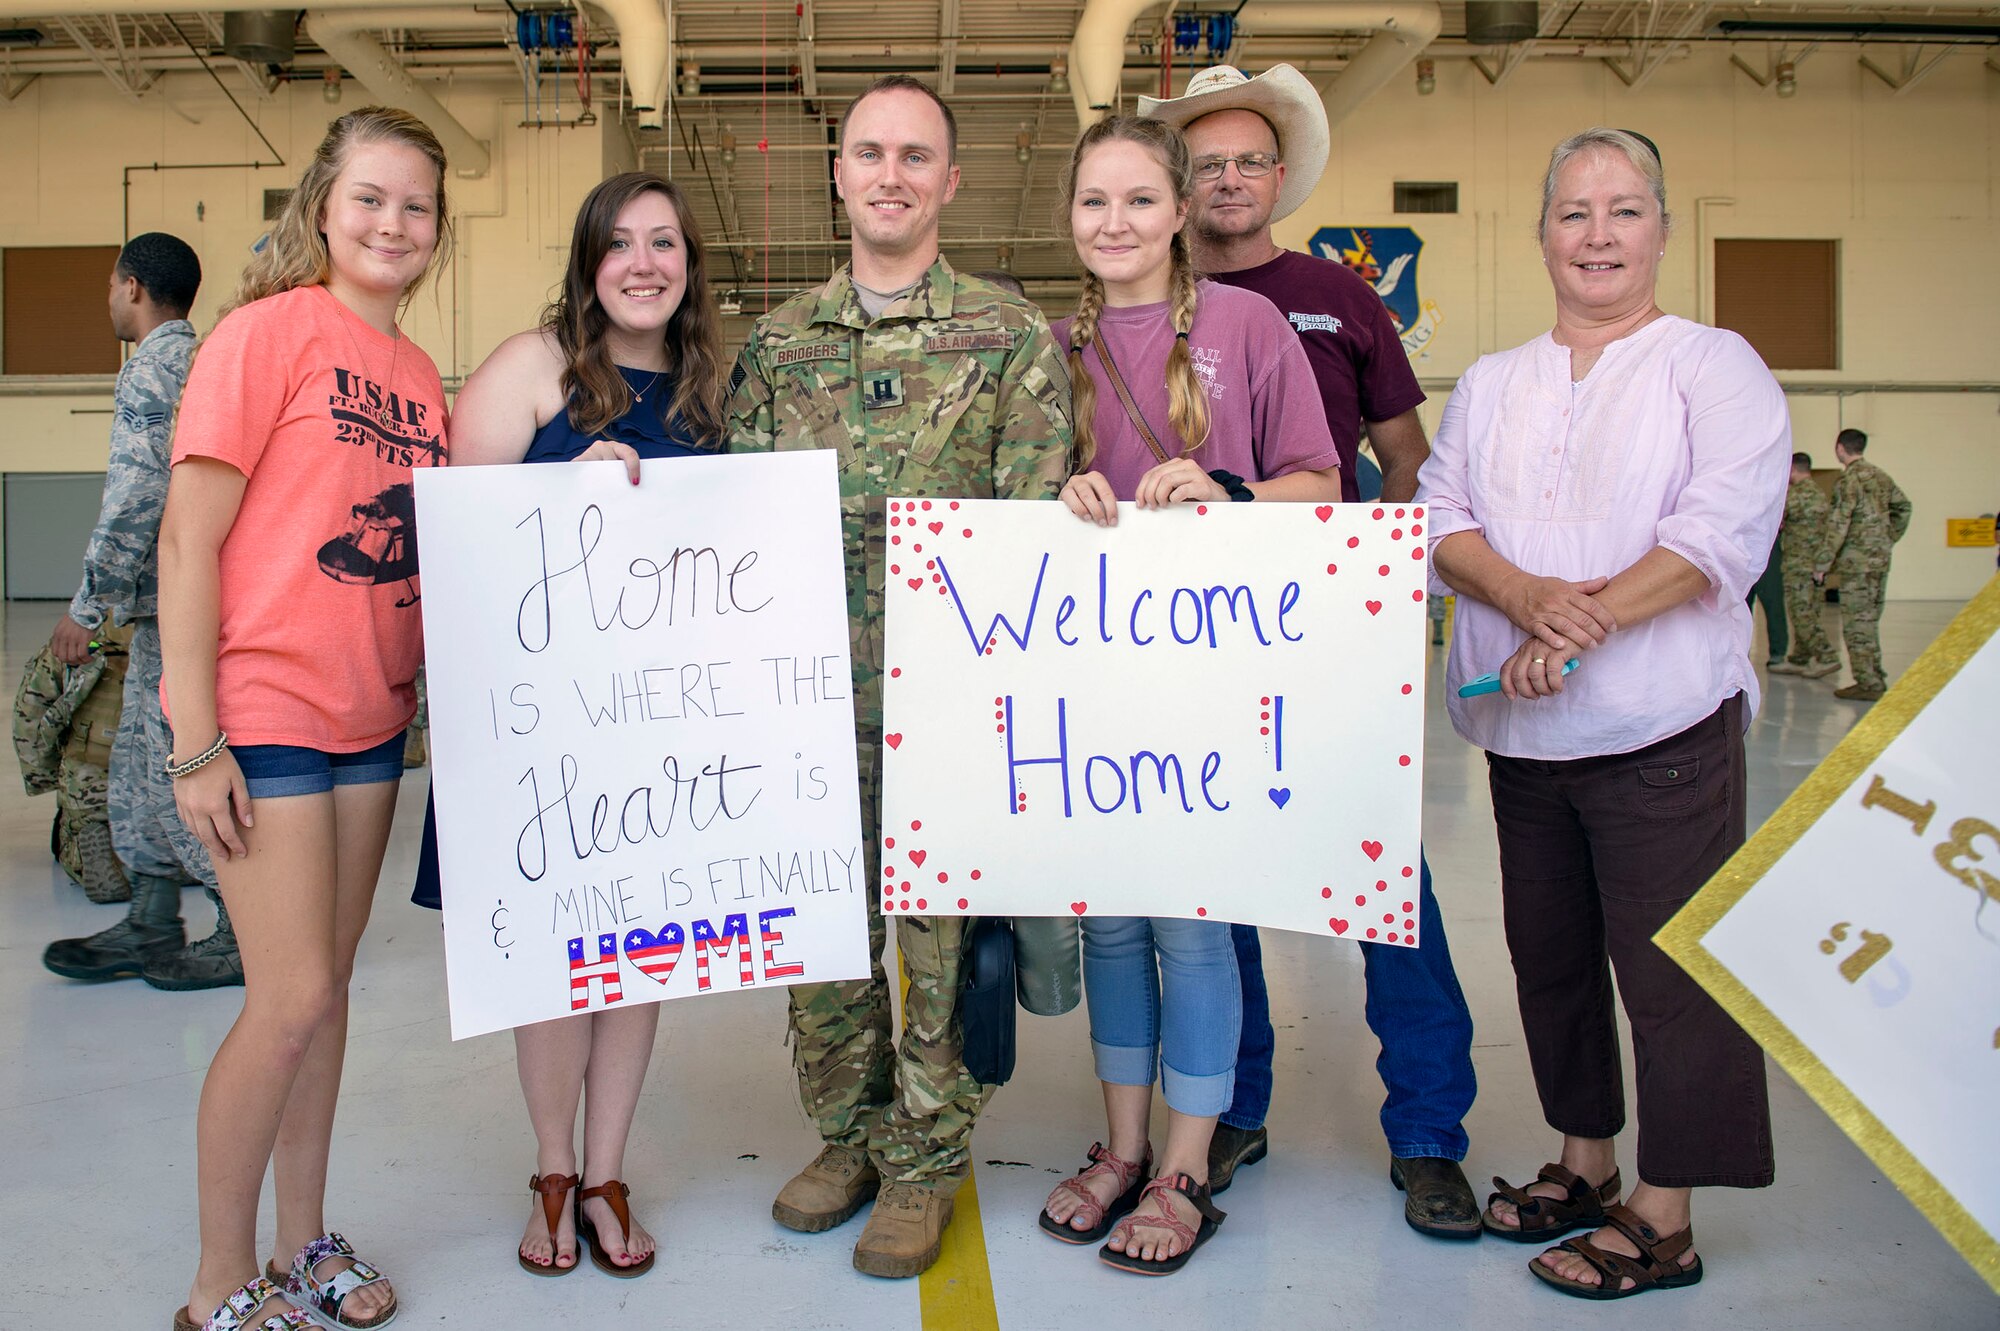 cCapt. Dalton Bridgers, 41st Rescue Squadron (RQS) HH-60G Pave Hawk pilot, reunites with his family during a redeployment ceremony, July 10, 2018, at Moody Air Force Base, Ga. While deployed, the 41st RQS and 41st Helicopter Maintenance Unit provided combat search and rescue capabilities and maintenance operations in support of Combined Joint Task Force-Horn of Africa. (U.S Air Force photo by Senior Airman Greg Nash)